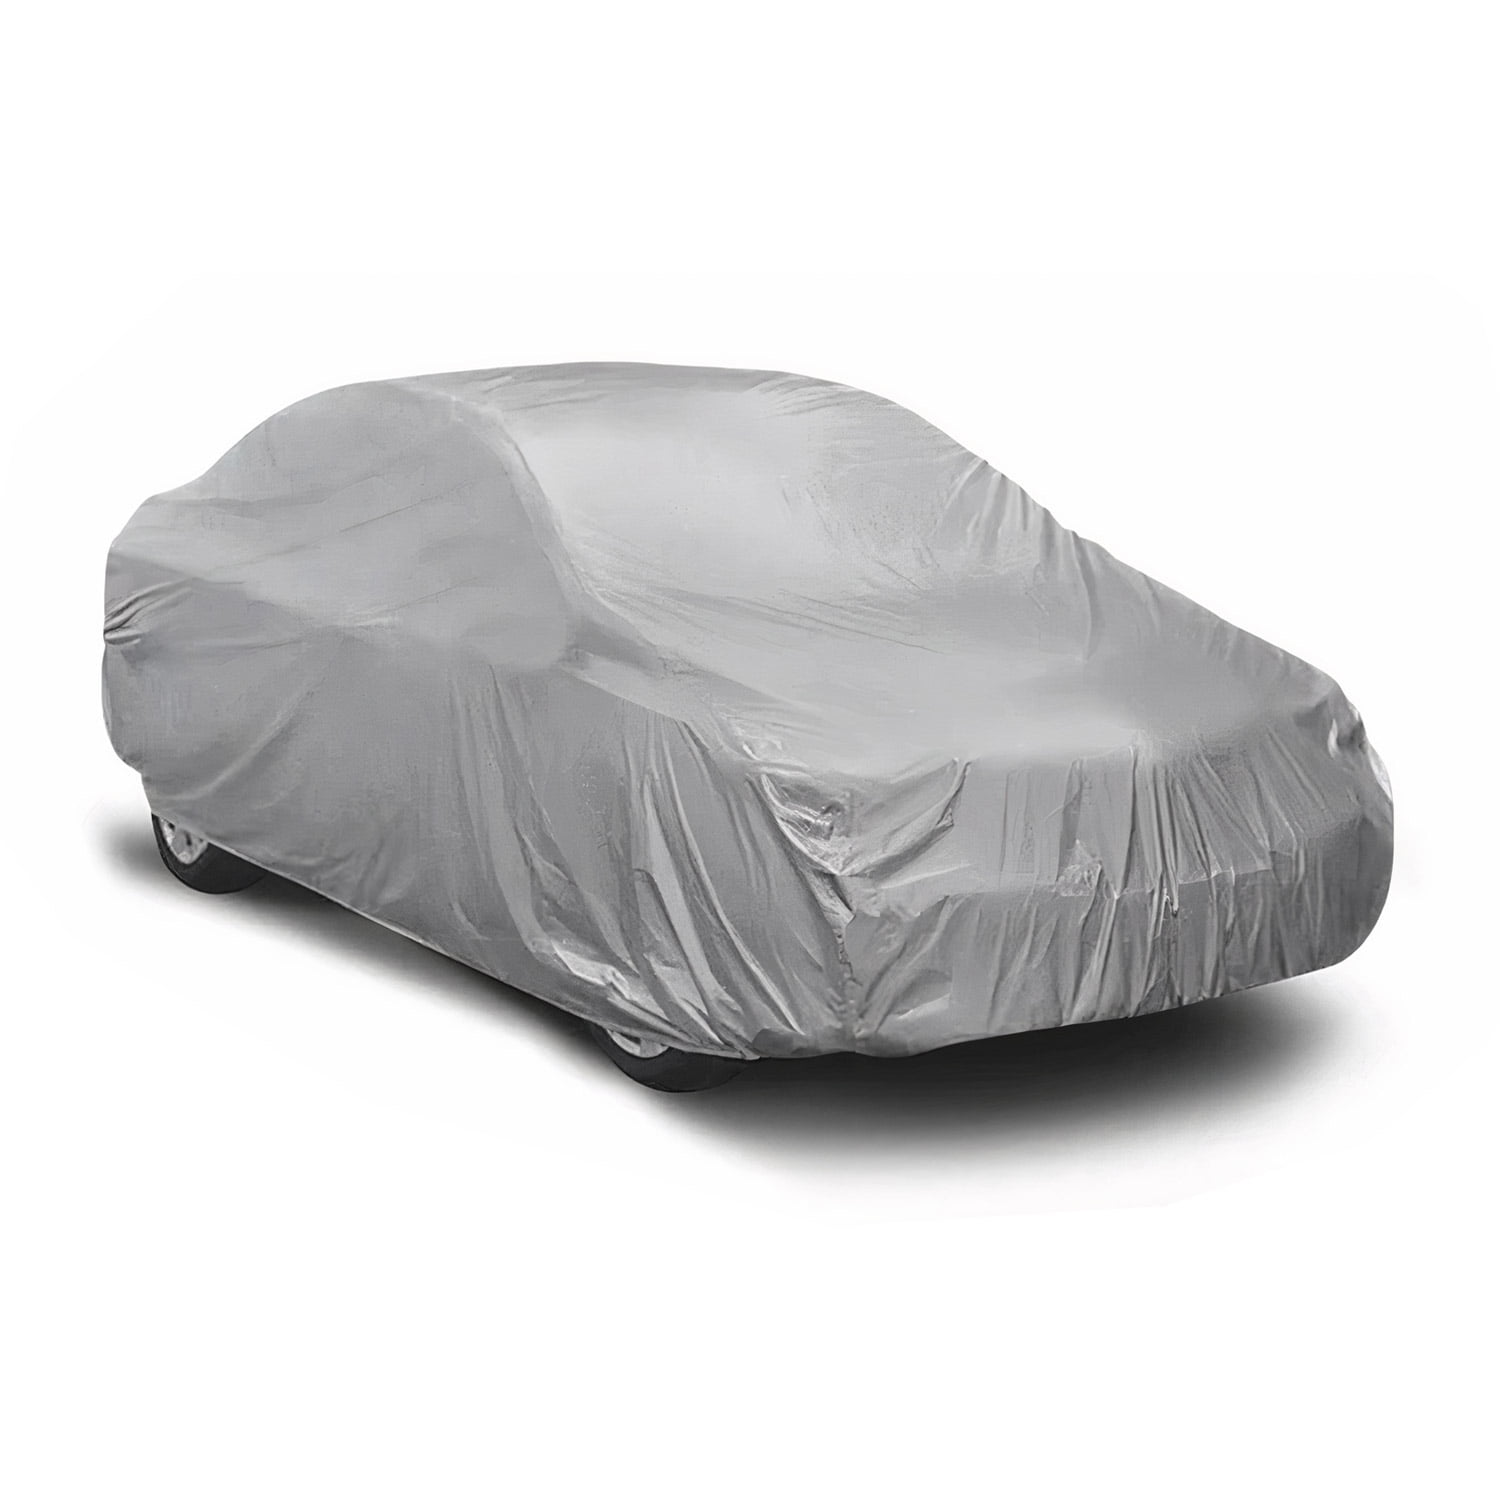 WellVisors Durable All Weather Car Cover For 2019-2023 BMW Z4 Convertible